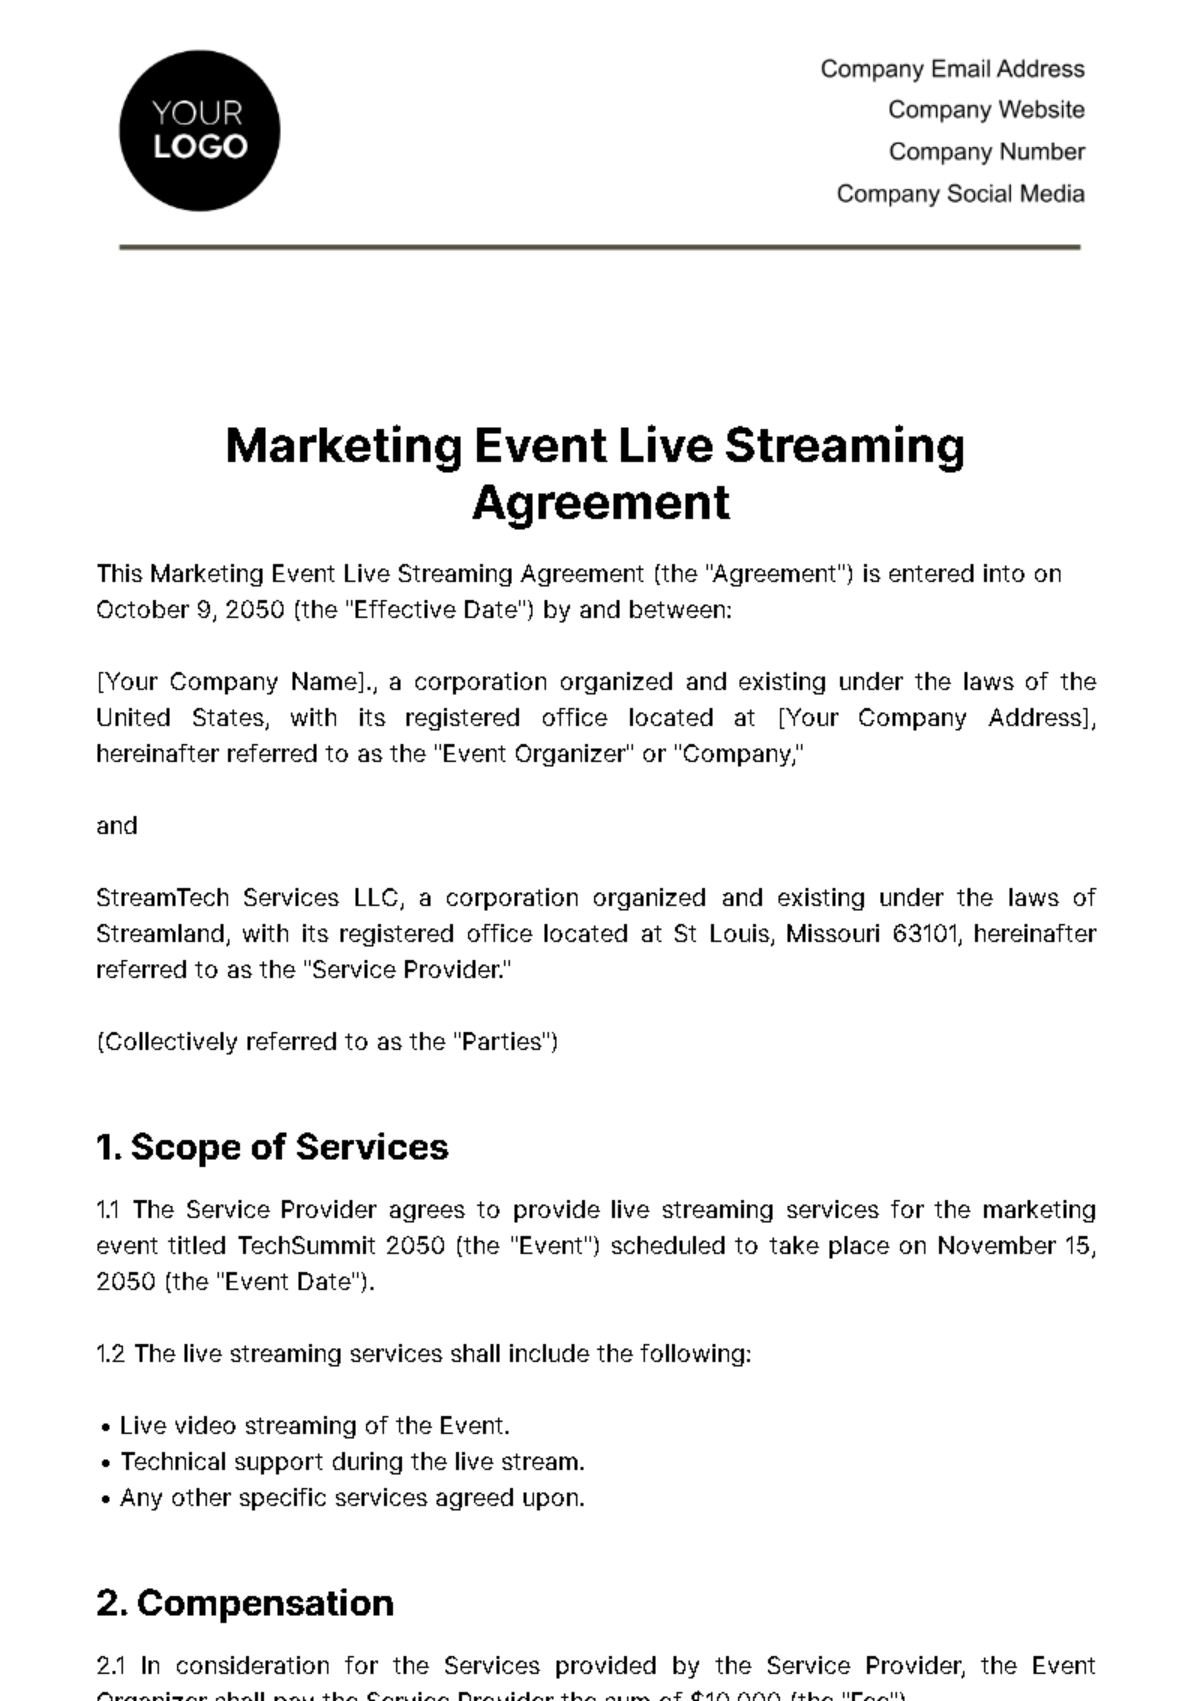 Free Marketing Event Live Streaming Agreement Template